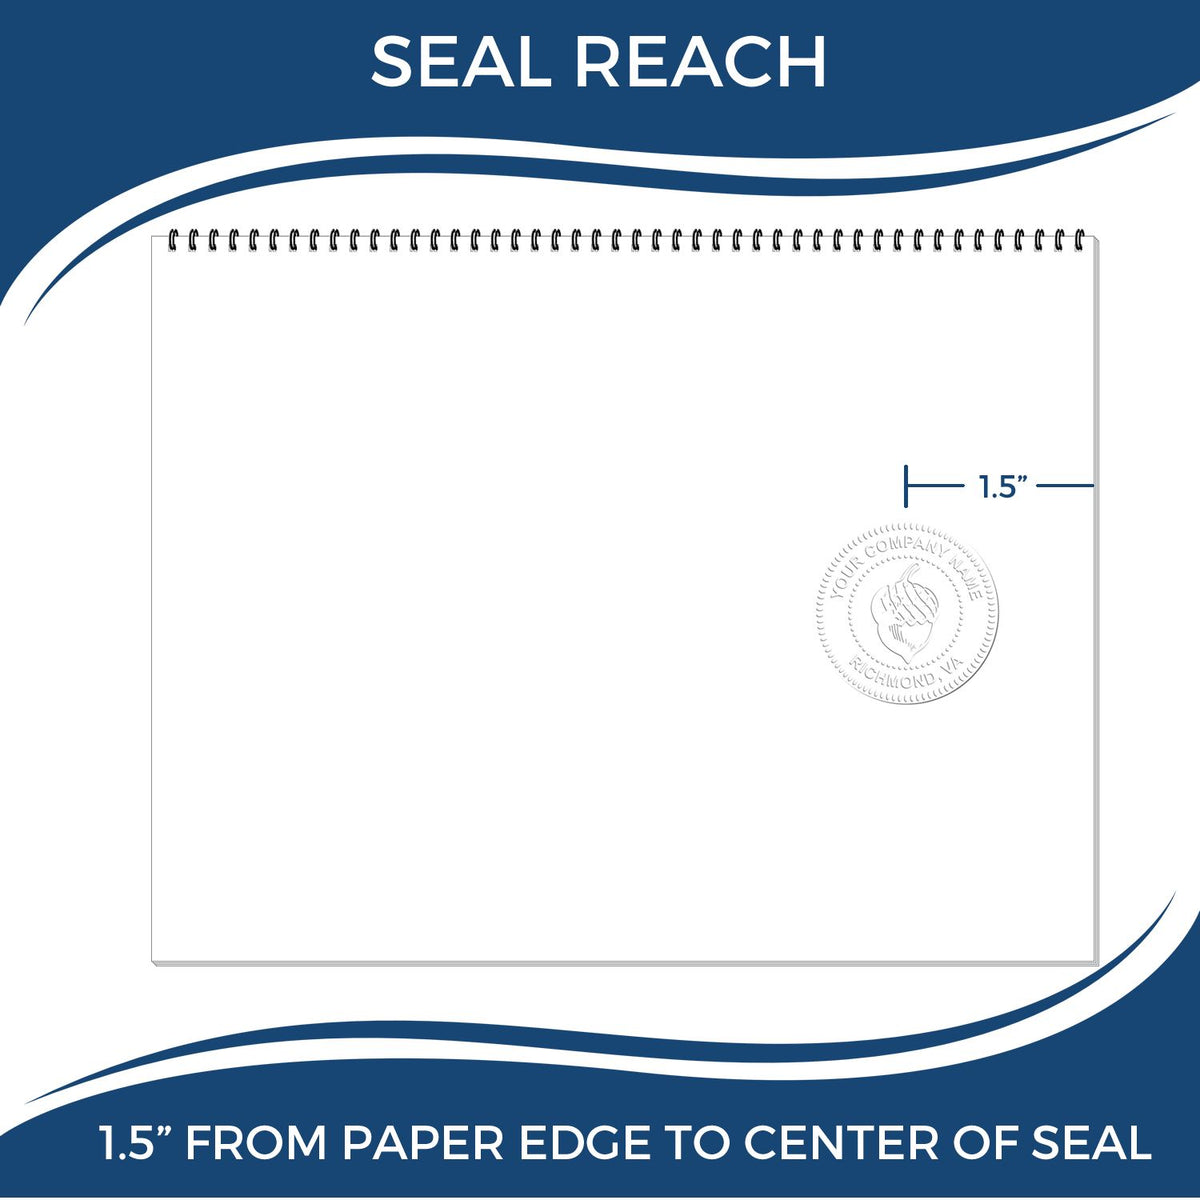 An infographic showing the seal reach which is represented by a ruler and a miniature seal image of the Soft Pocket Kansas Landscape Architect Embosser